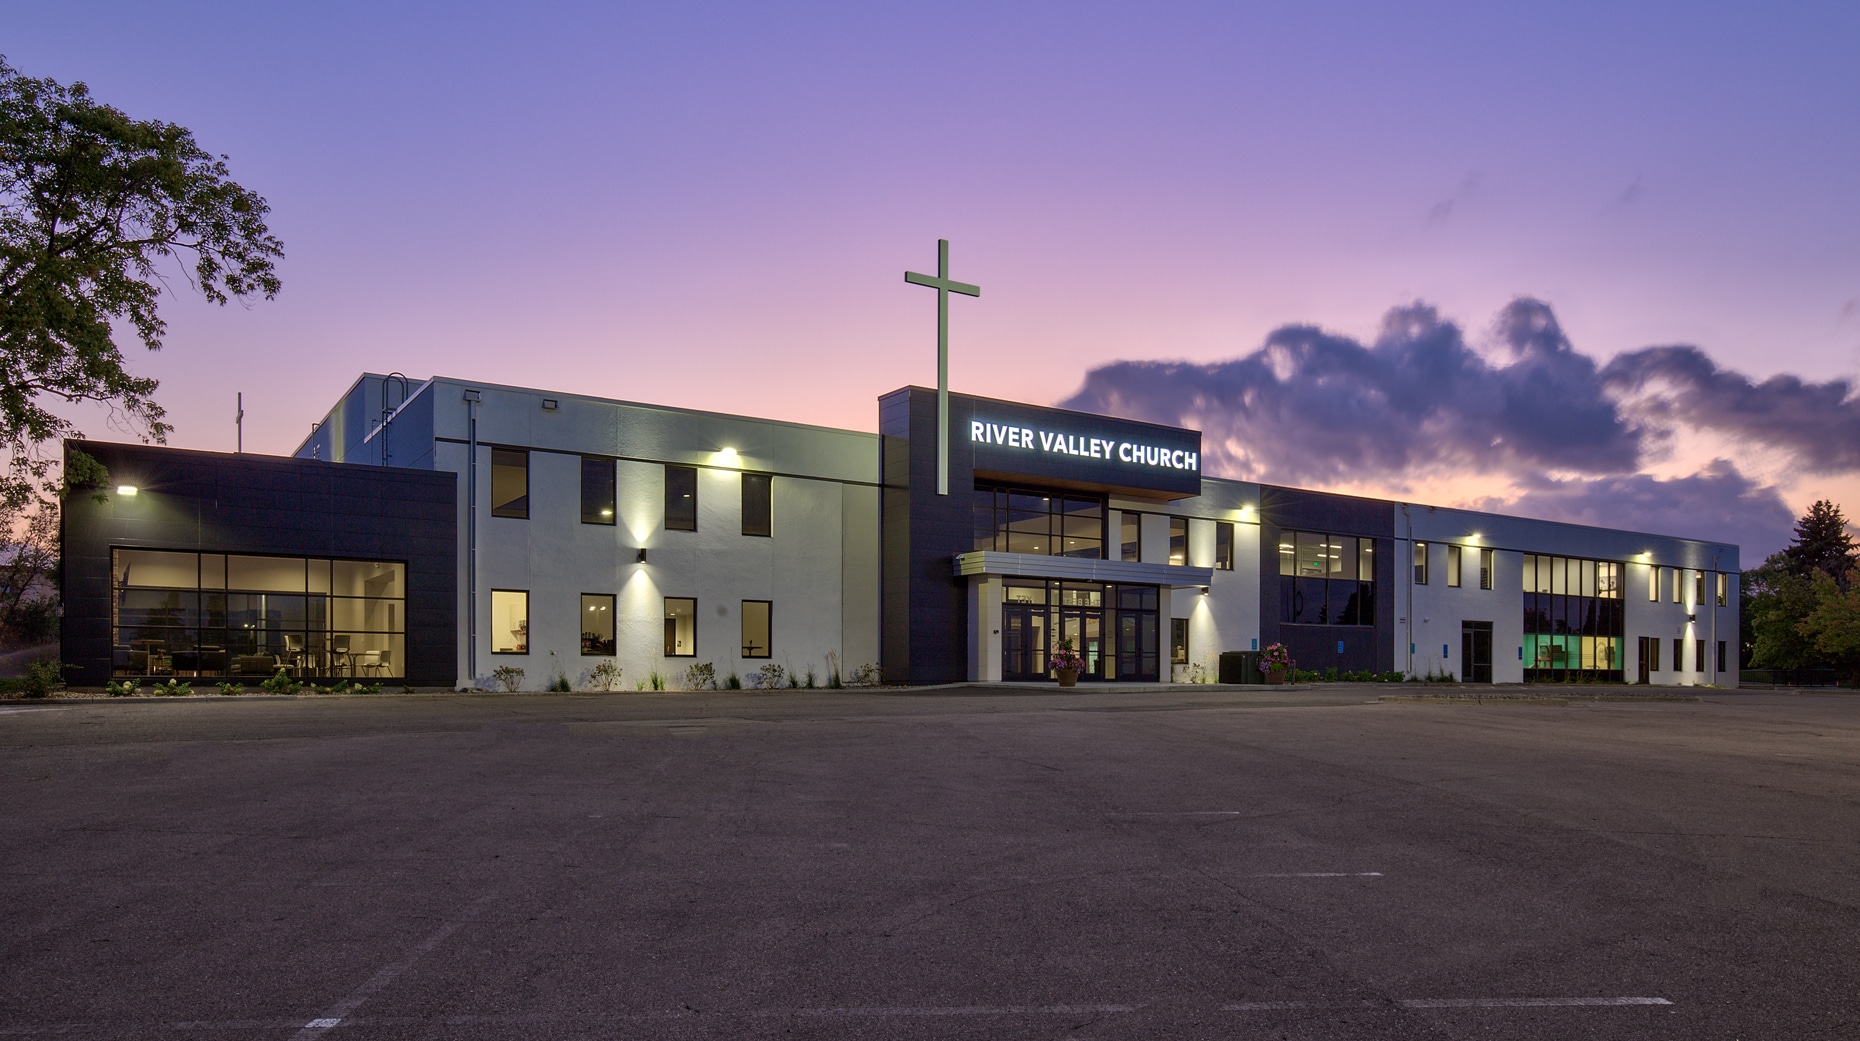 Vanman Architects and Builders | Local church architects and commercial builders in Apple Valley